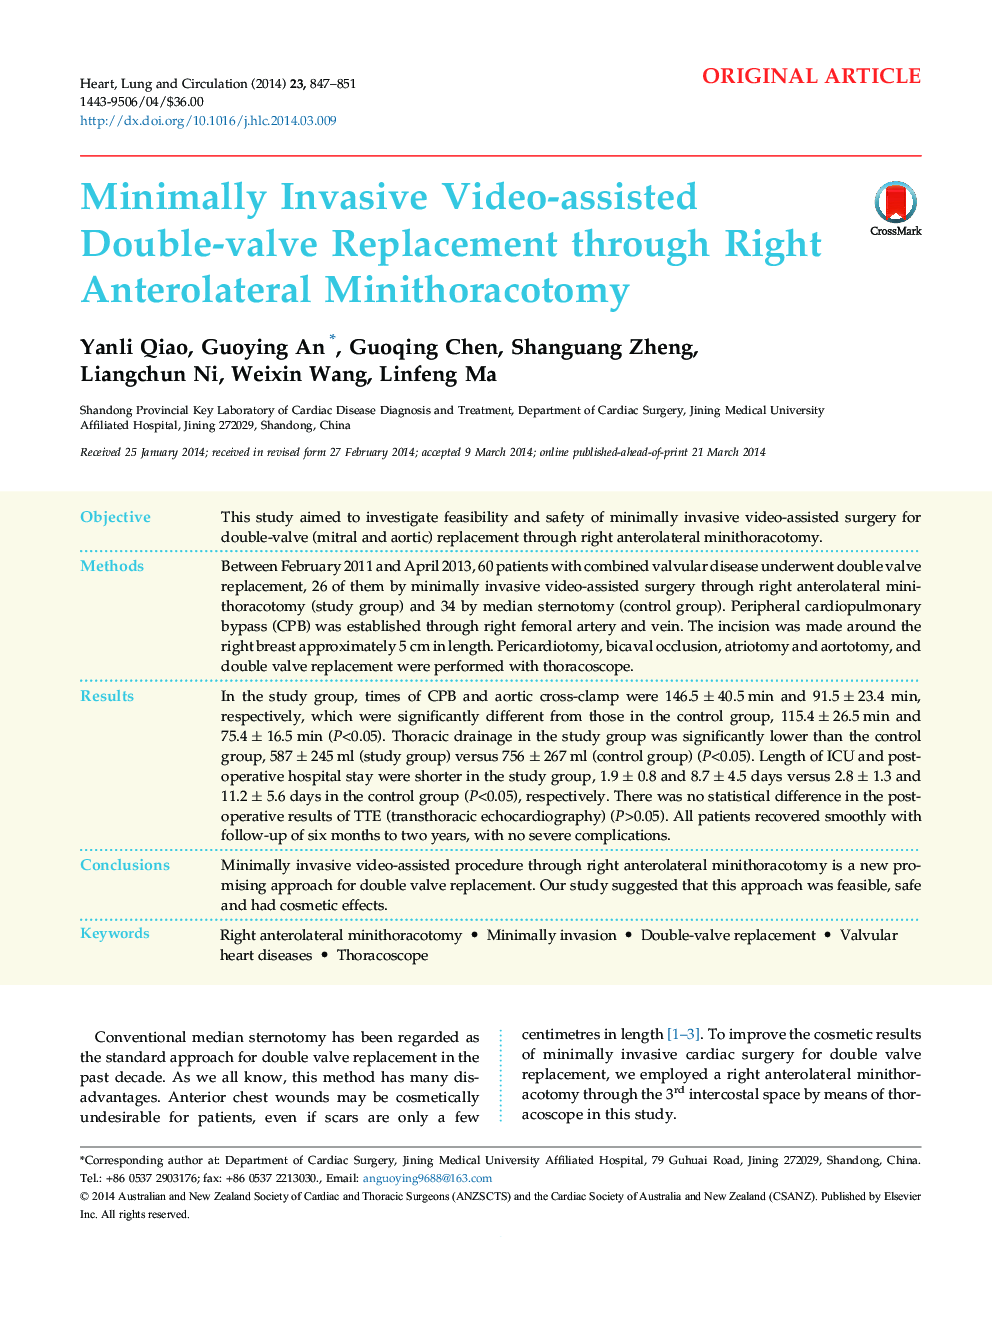 Minimally Invasive Video-assisted Double-valve Replacement through Right Anterolateral Minithoracotomy